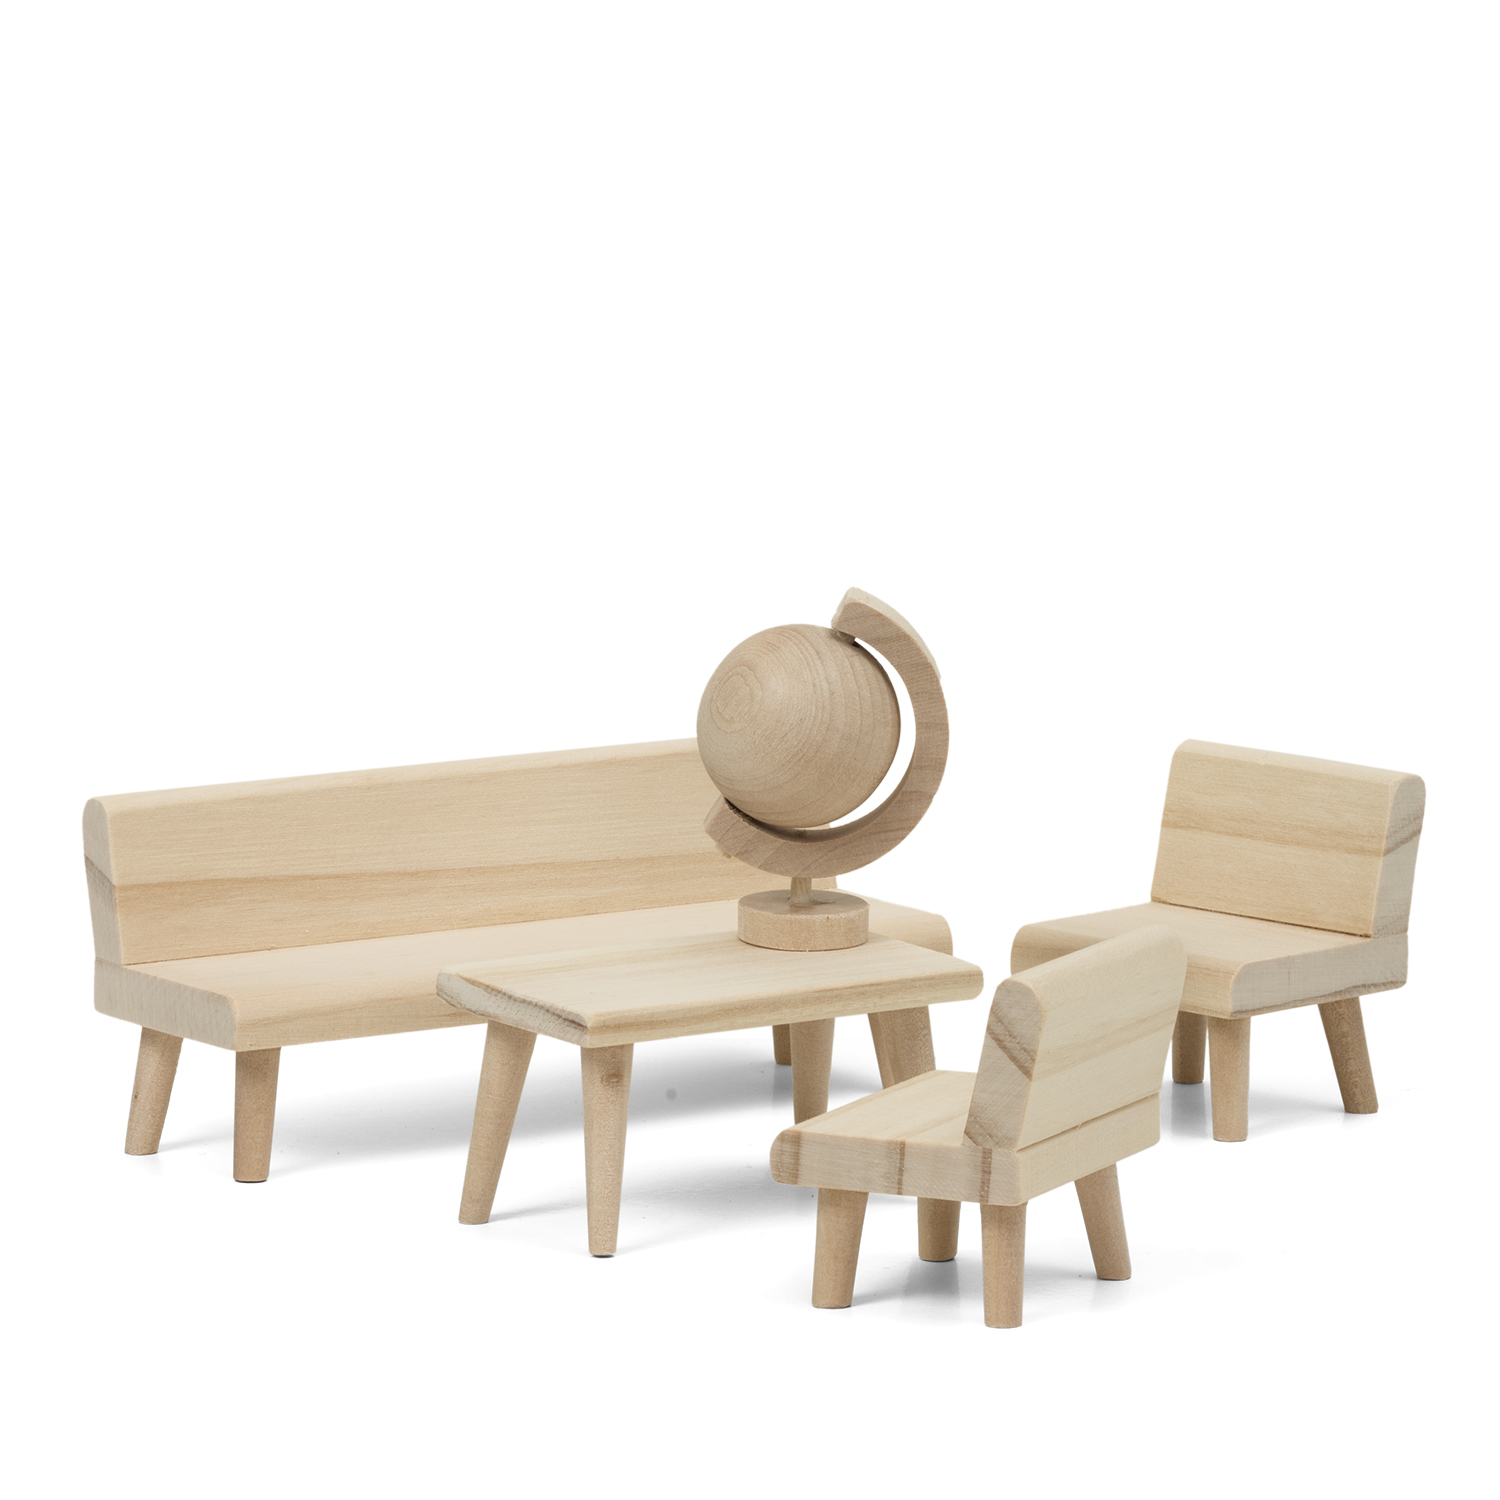 Wooden toys lundby dollhouse furniture living room set natural wood